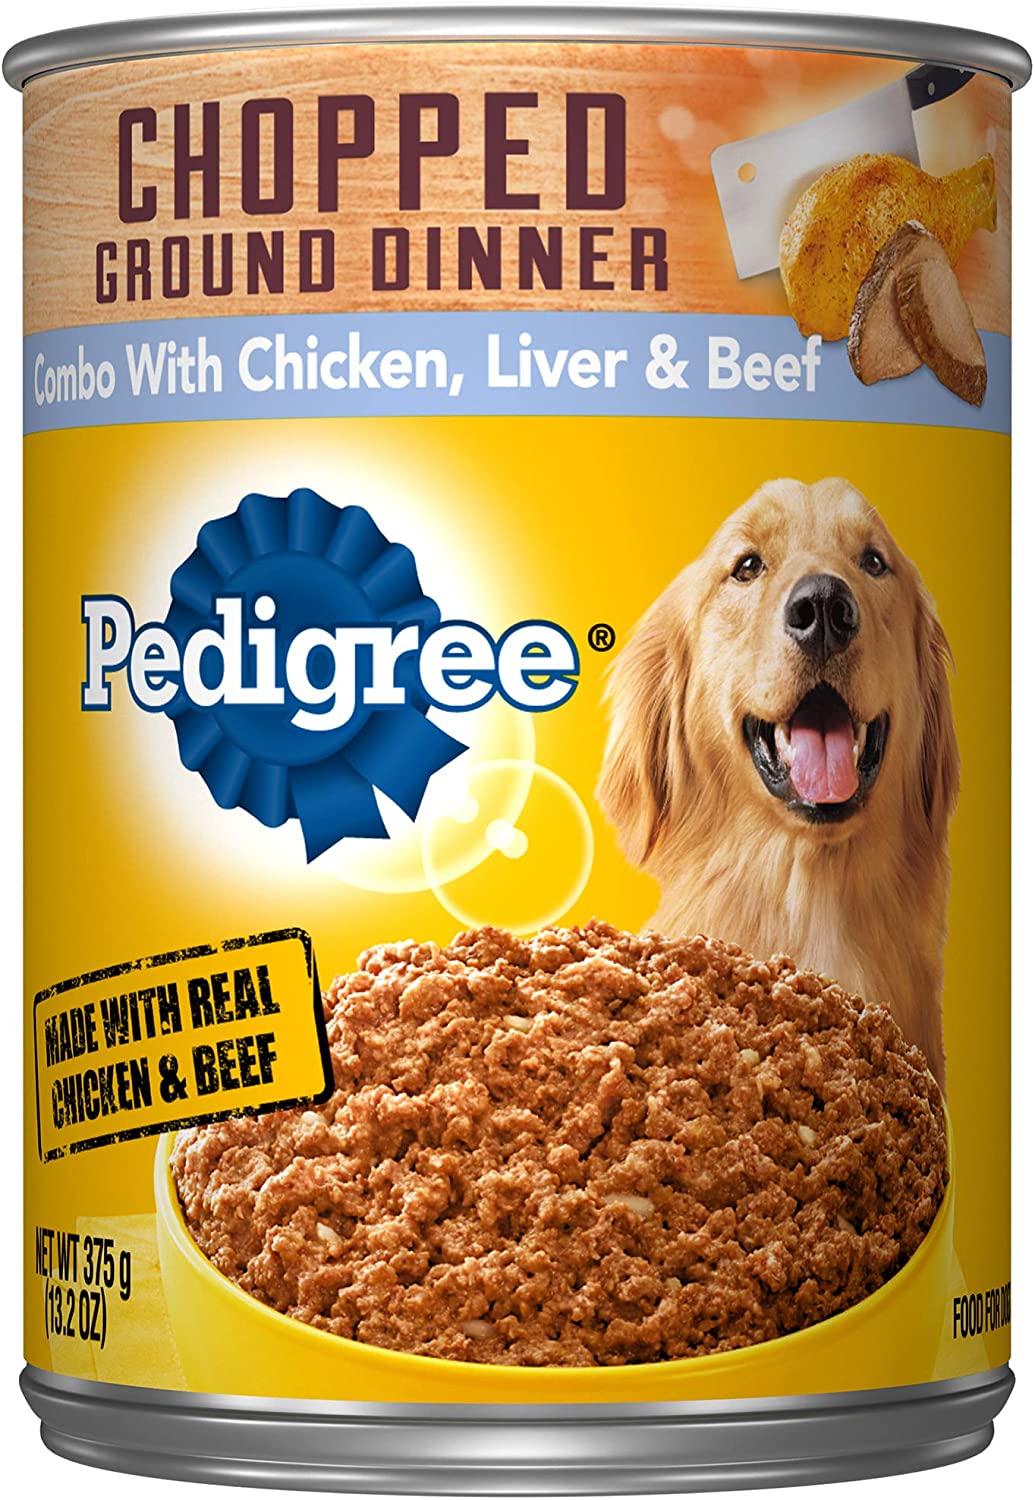 PEDIGREE Chopped Ground Dinner with Chicken, Beef & Liver Dog Food